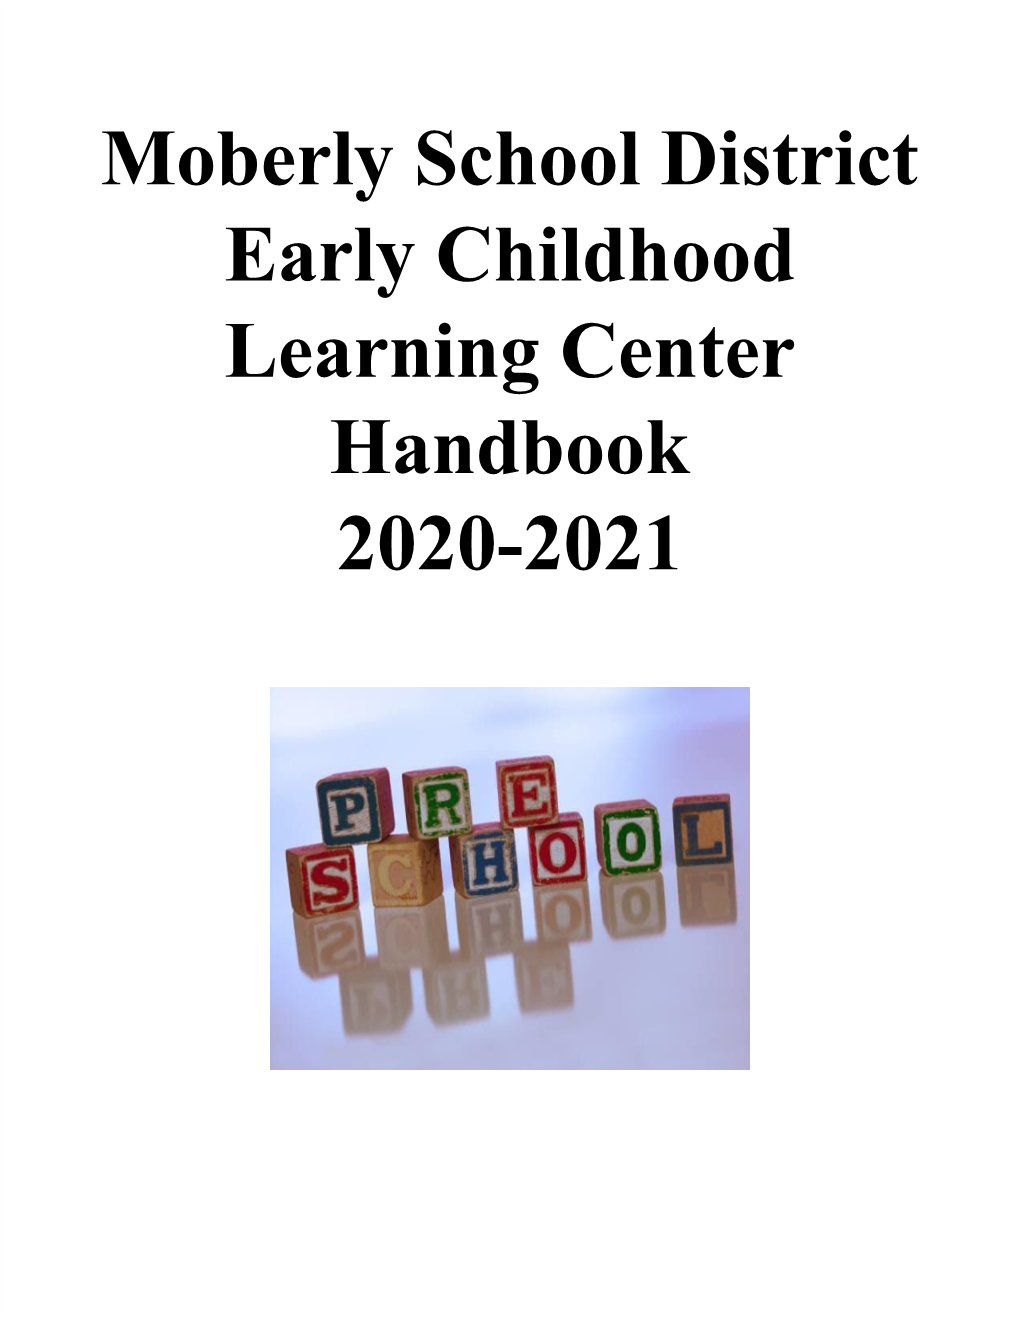 Moberly School District Early Childhood Learning Center Handbook 2020-2021